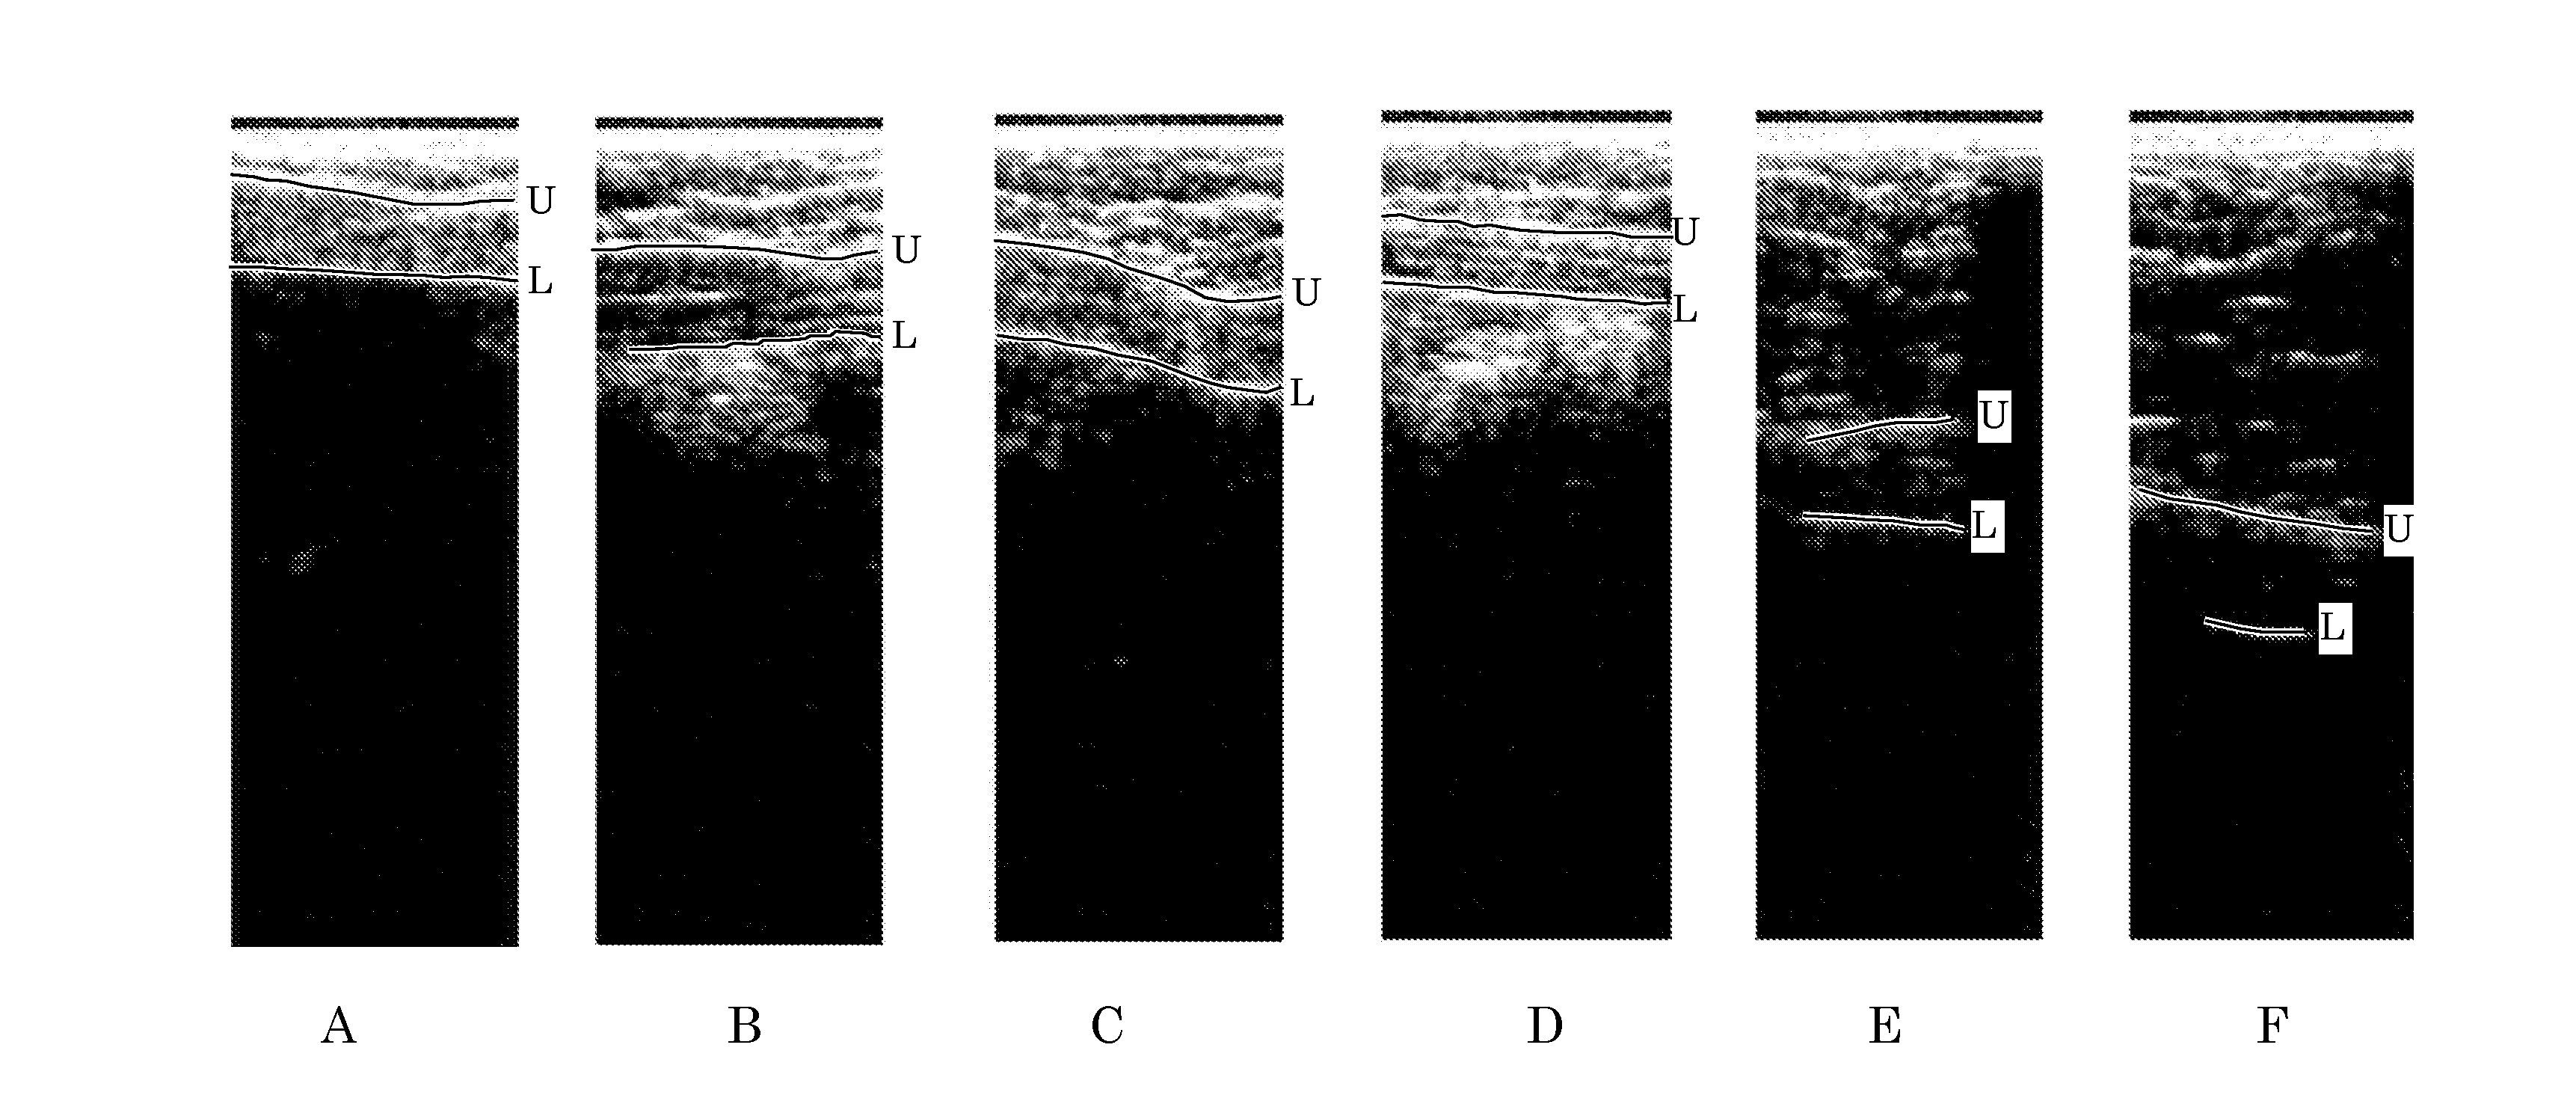 Orientation-Aware Average Intensity Histogram to Indicate Object Boundary Depth in Ultrasound Images